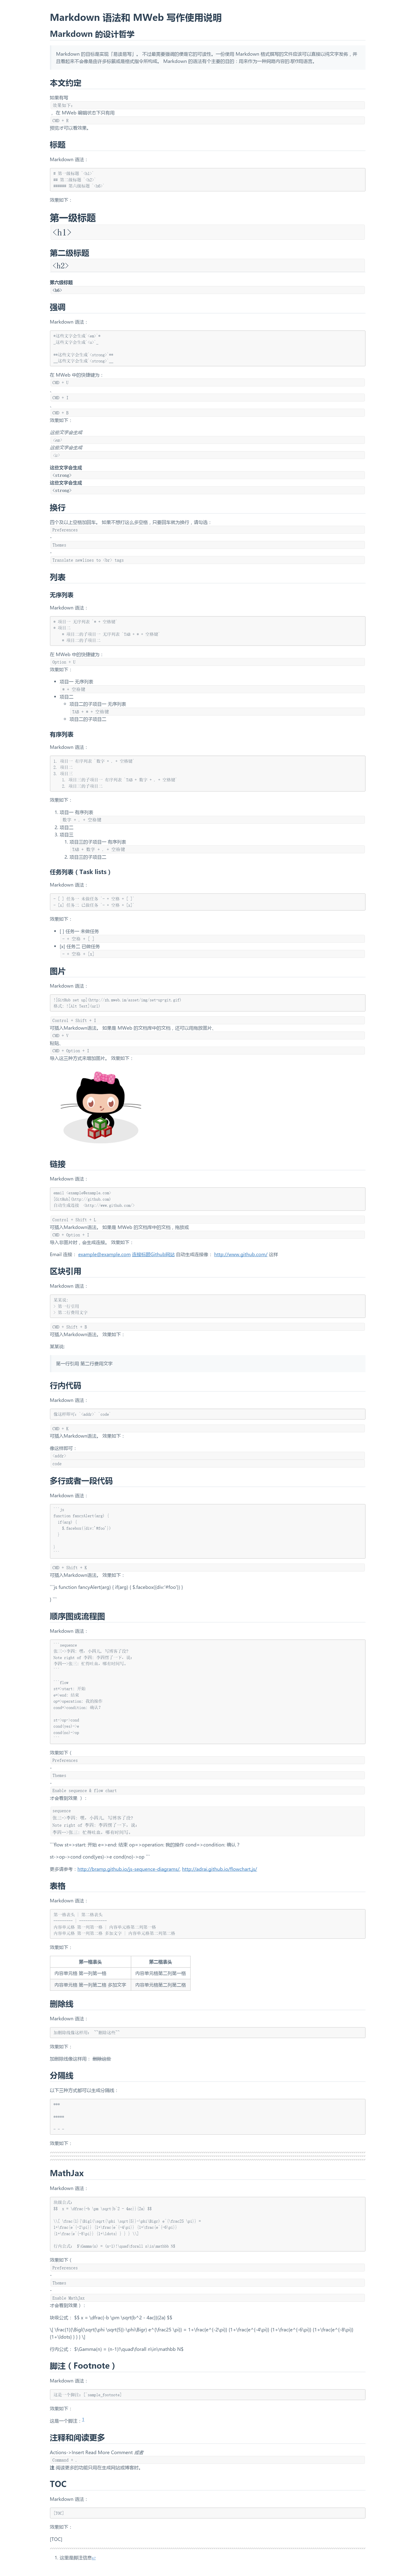 markdowncss_github_style_blue_by_jwsky_preview